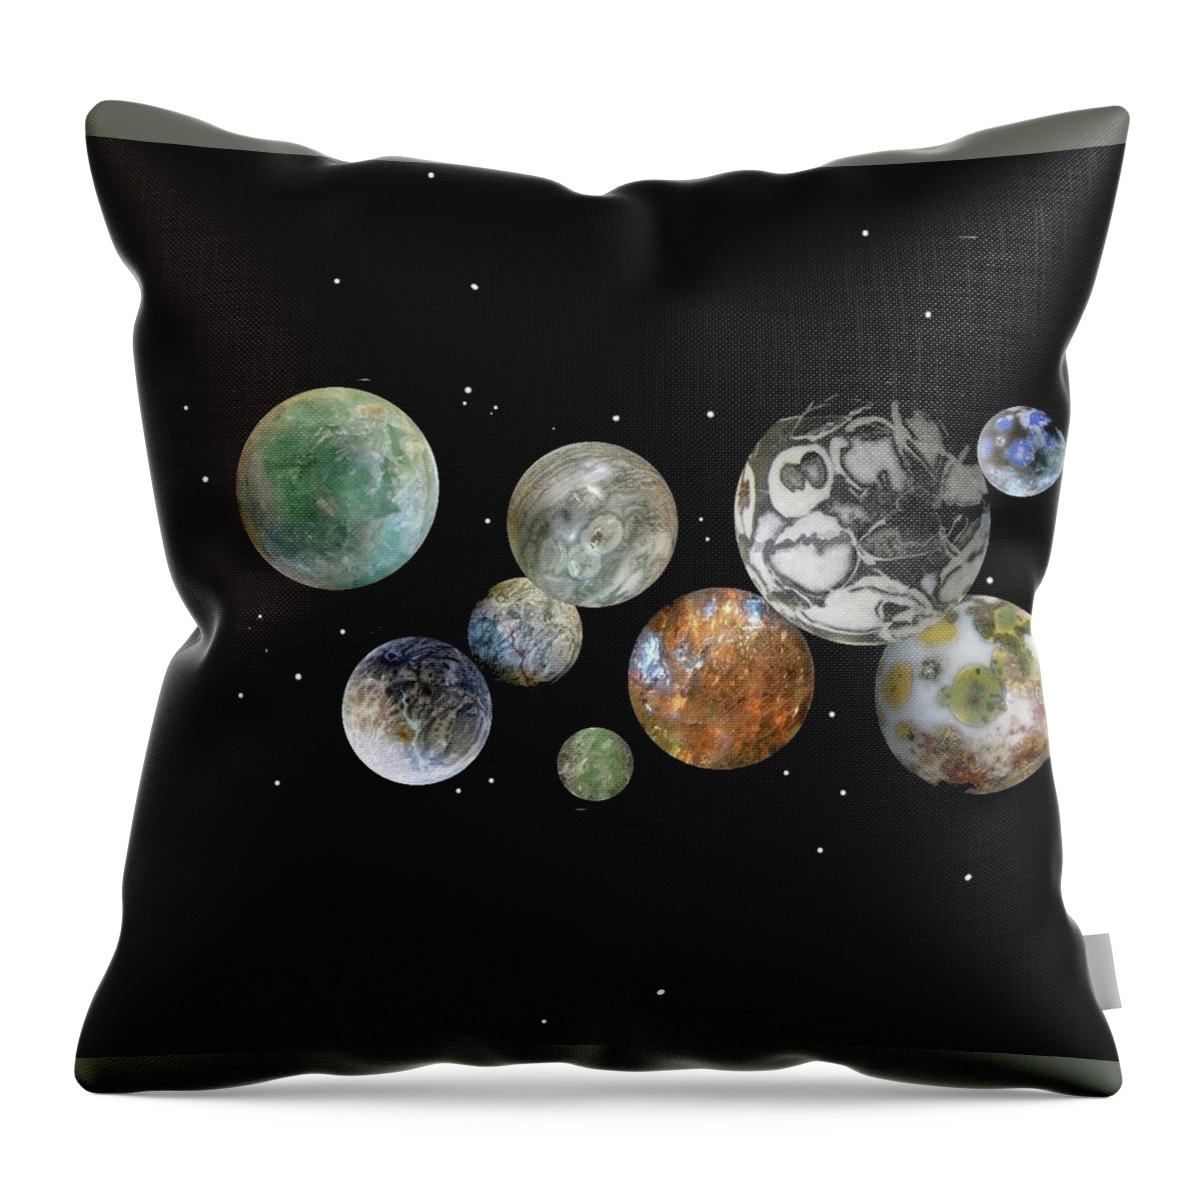 Planets Throw Pillow featuring the photograph When Worlds Collide by Tony Murray